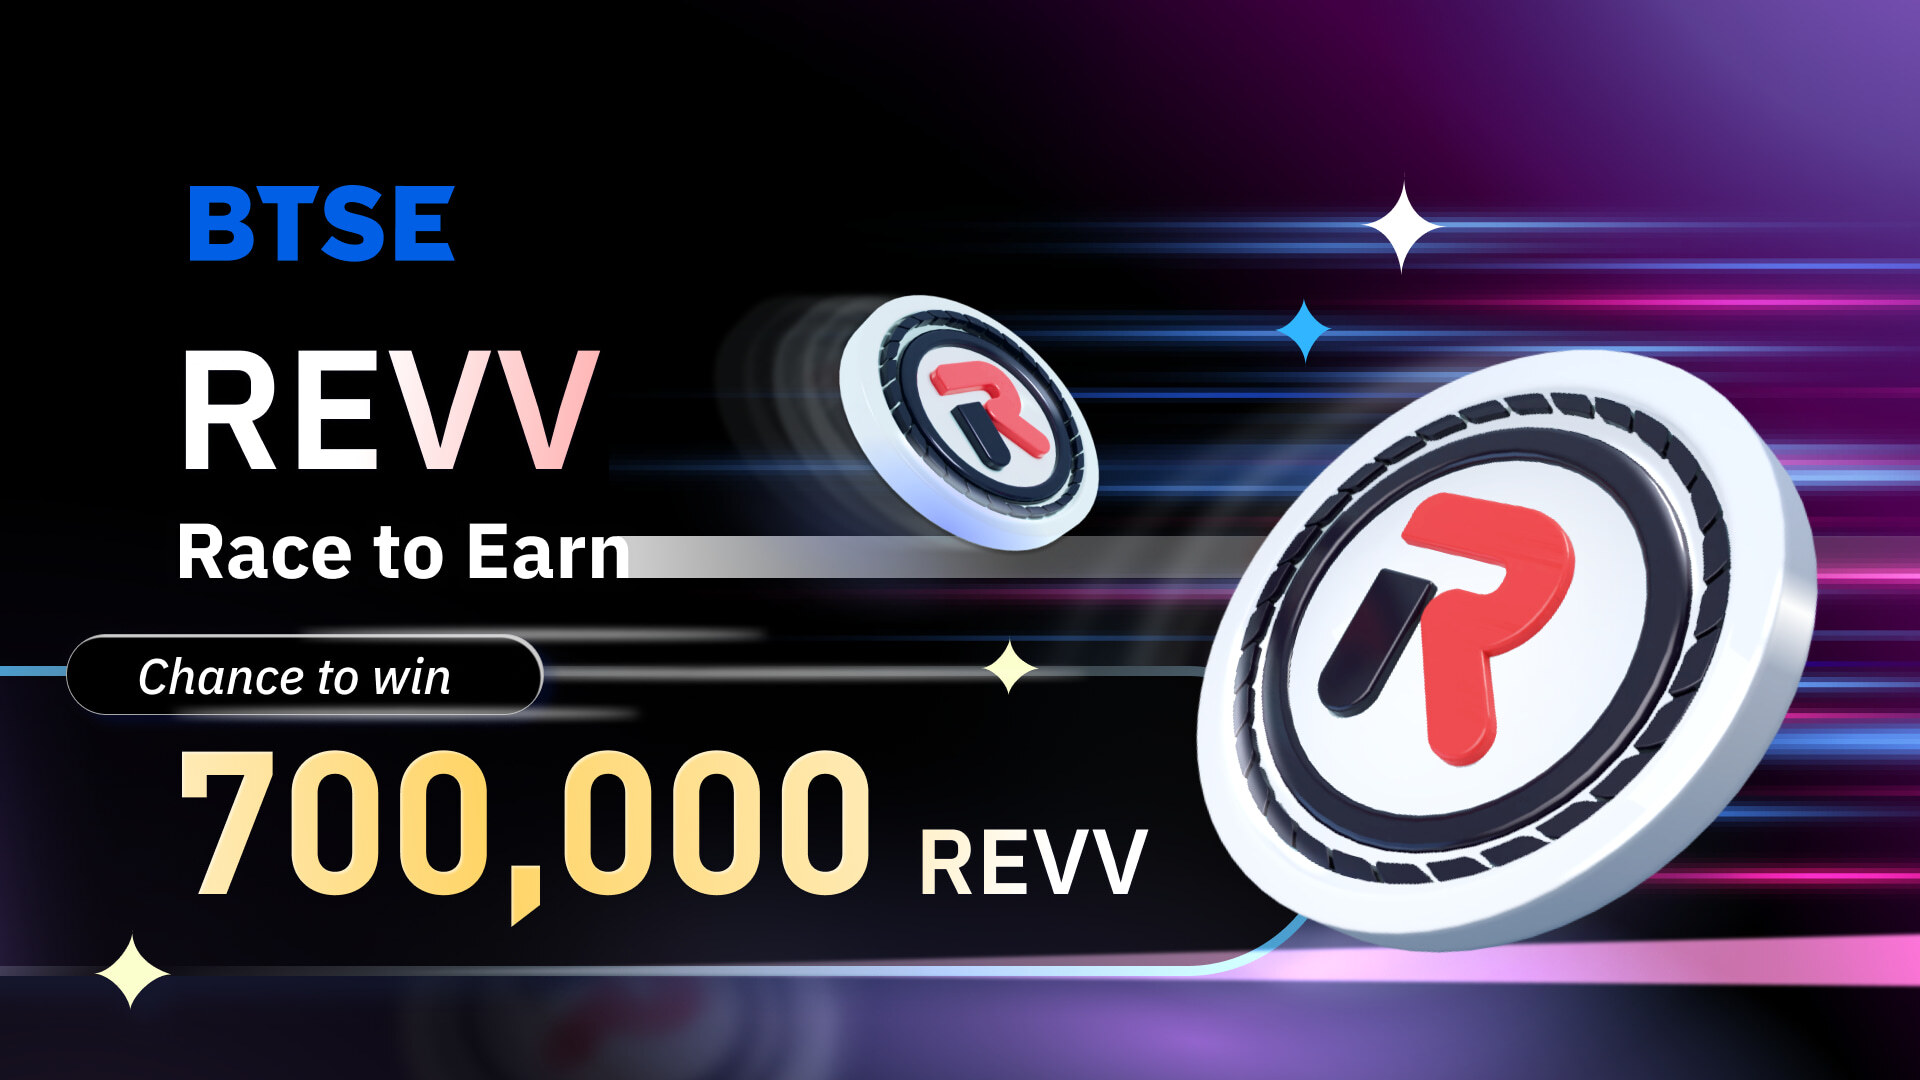 REVV is Here! Your Chance to Win from the 700,000 REVV Prize Pool!